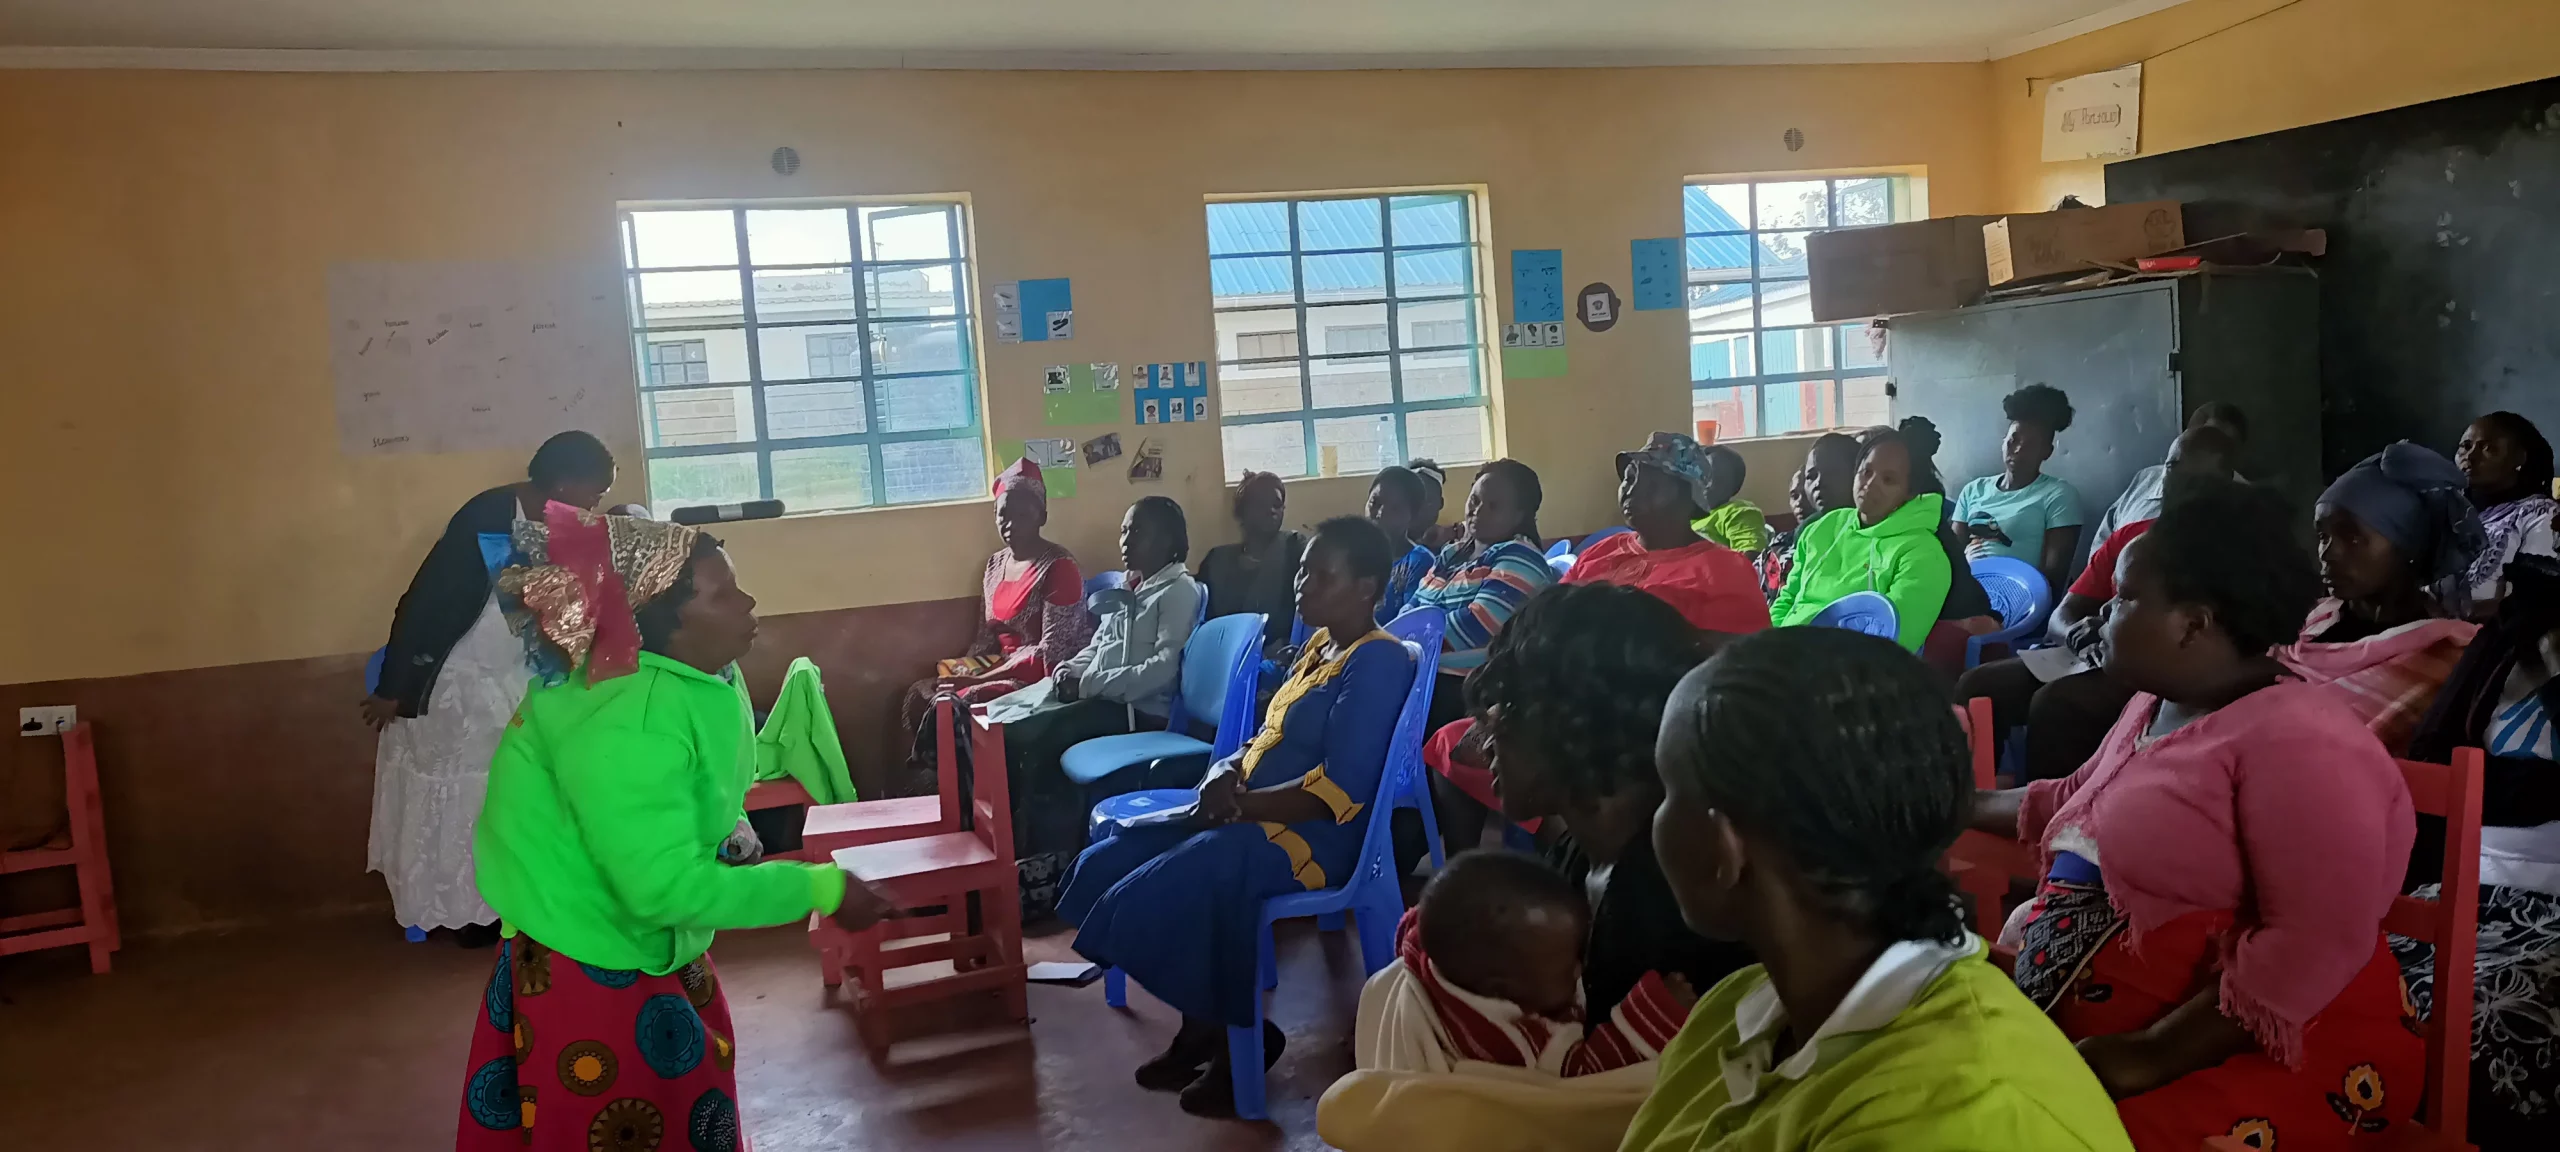 Scandicare.org team took the initiative to train caregivers of special needs children in Embulbul primary school on the need of taking care of themselves mentally as their health trickles down to their children's well being.